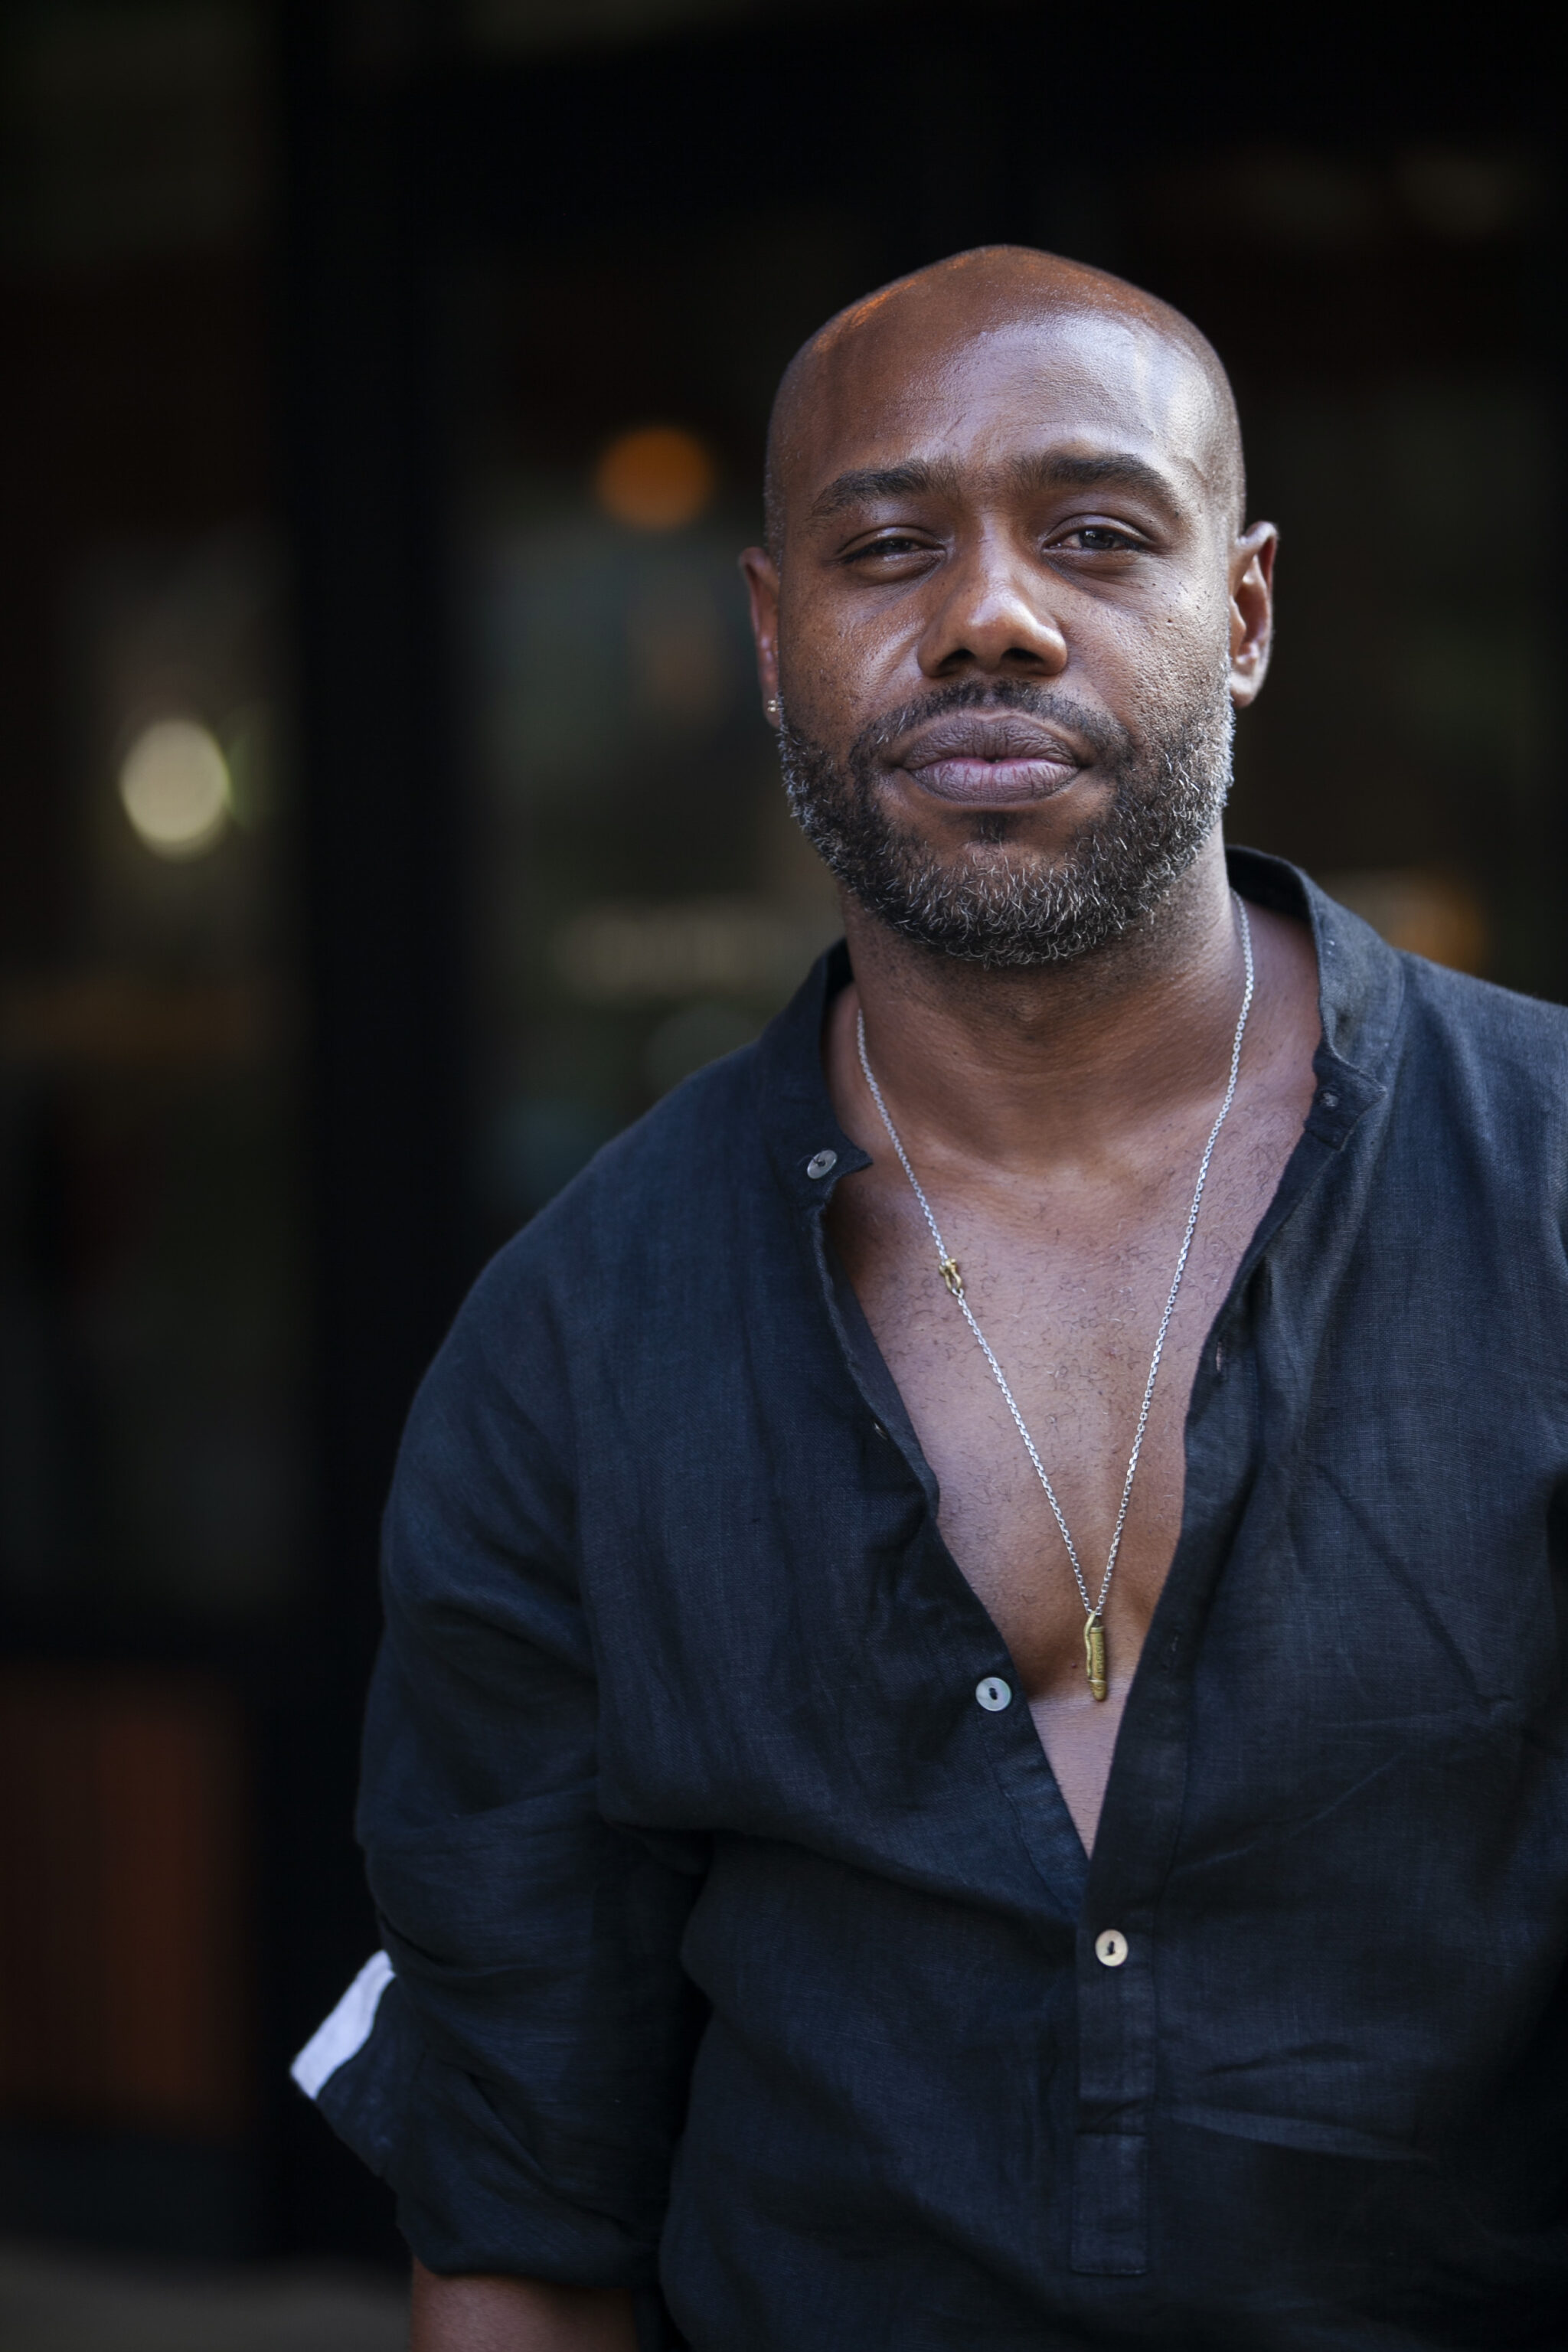 Pictured is artist, Marton Robinson. A dark-skinned bald Black man with a five o clock shadow. He wears a relax fit, black linen button up shirt, slightly unbuttoned to reveal his necklace.